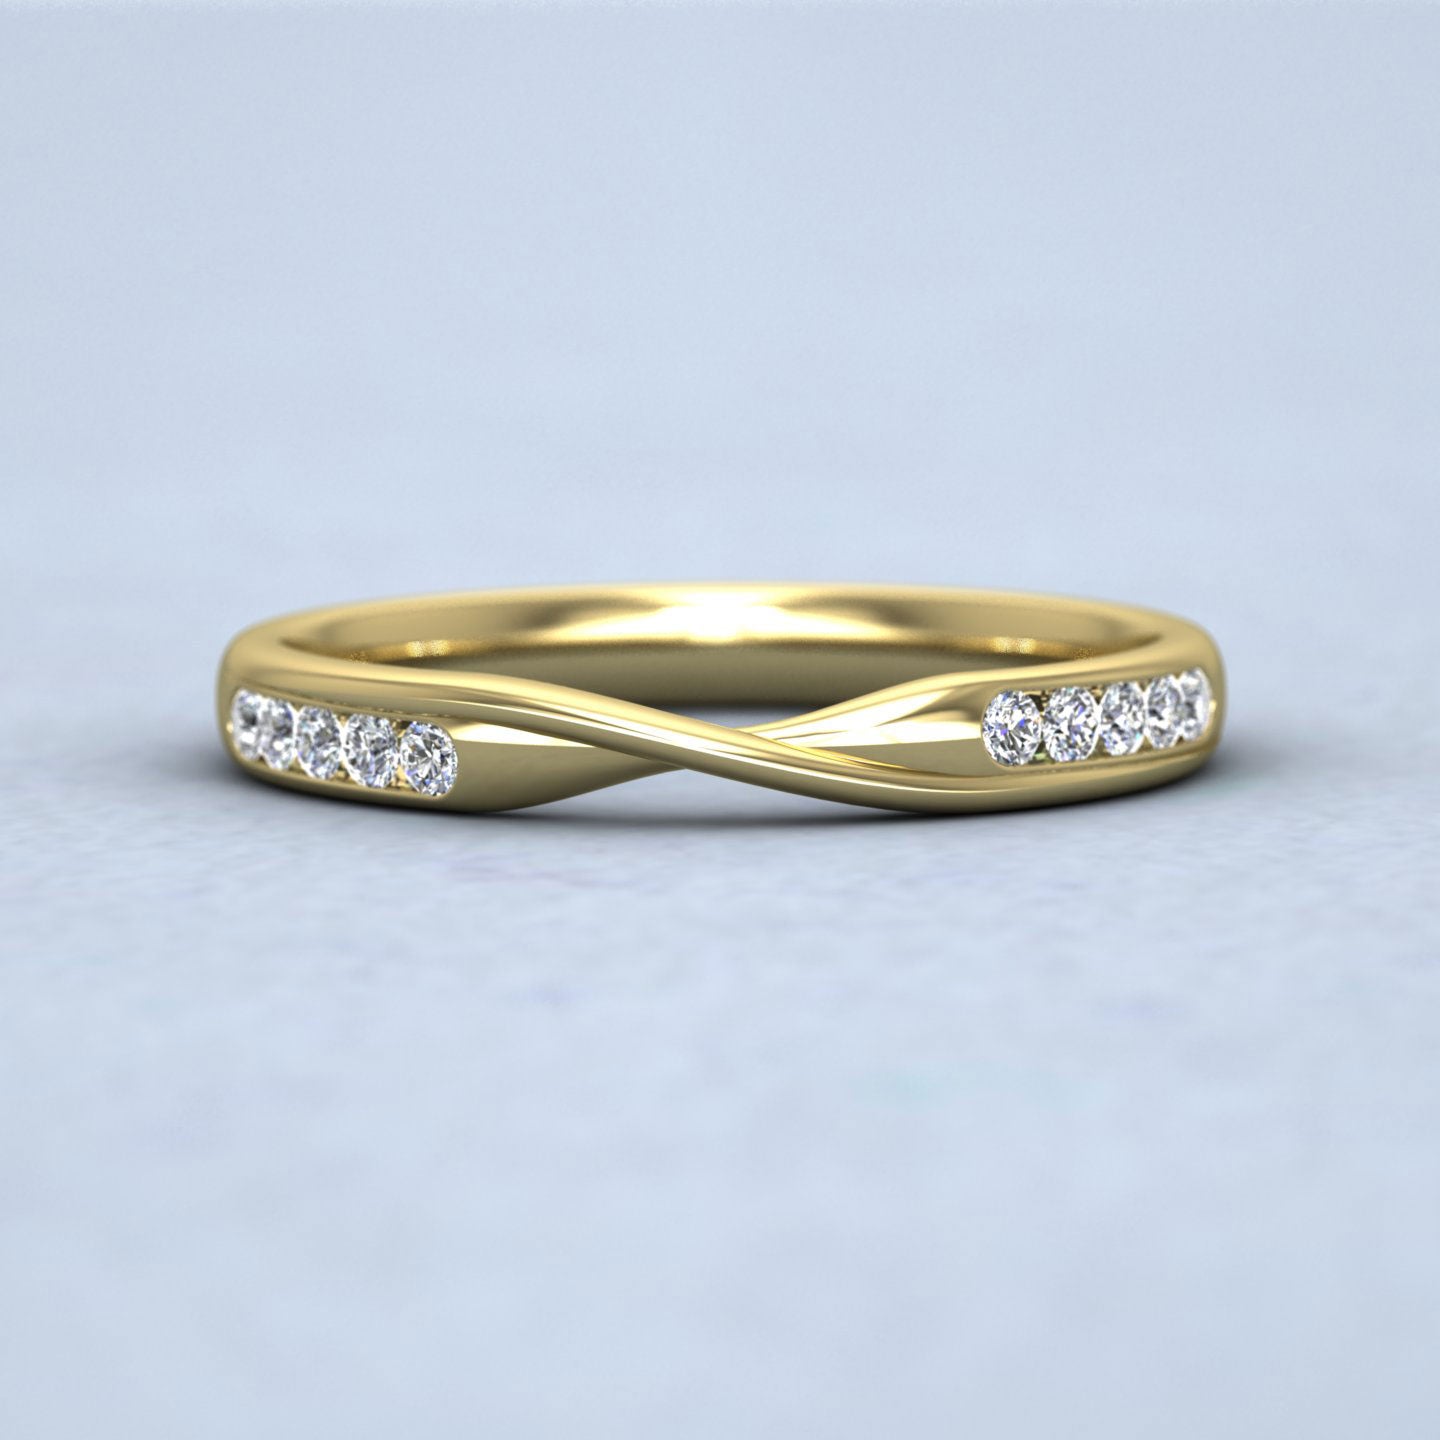 Crossover Pattern Wedding Ring In 18ct Yellow Gold 2.5mm Wide With Eight Diamonds